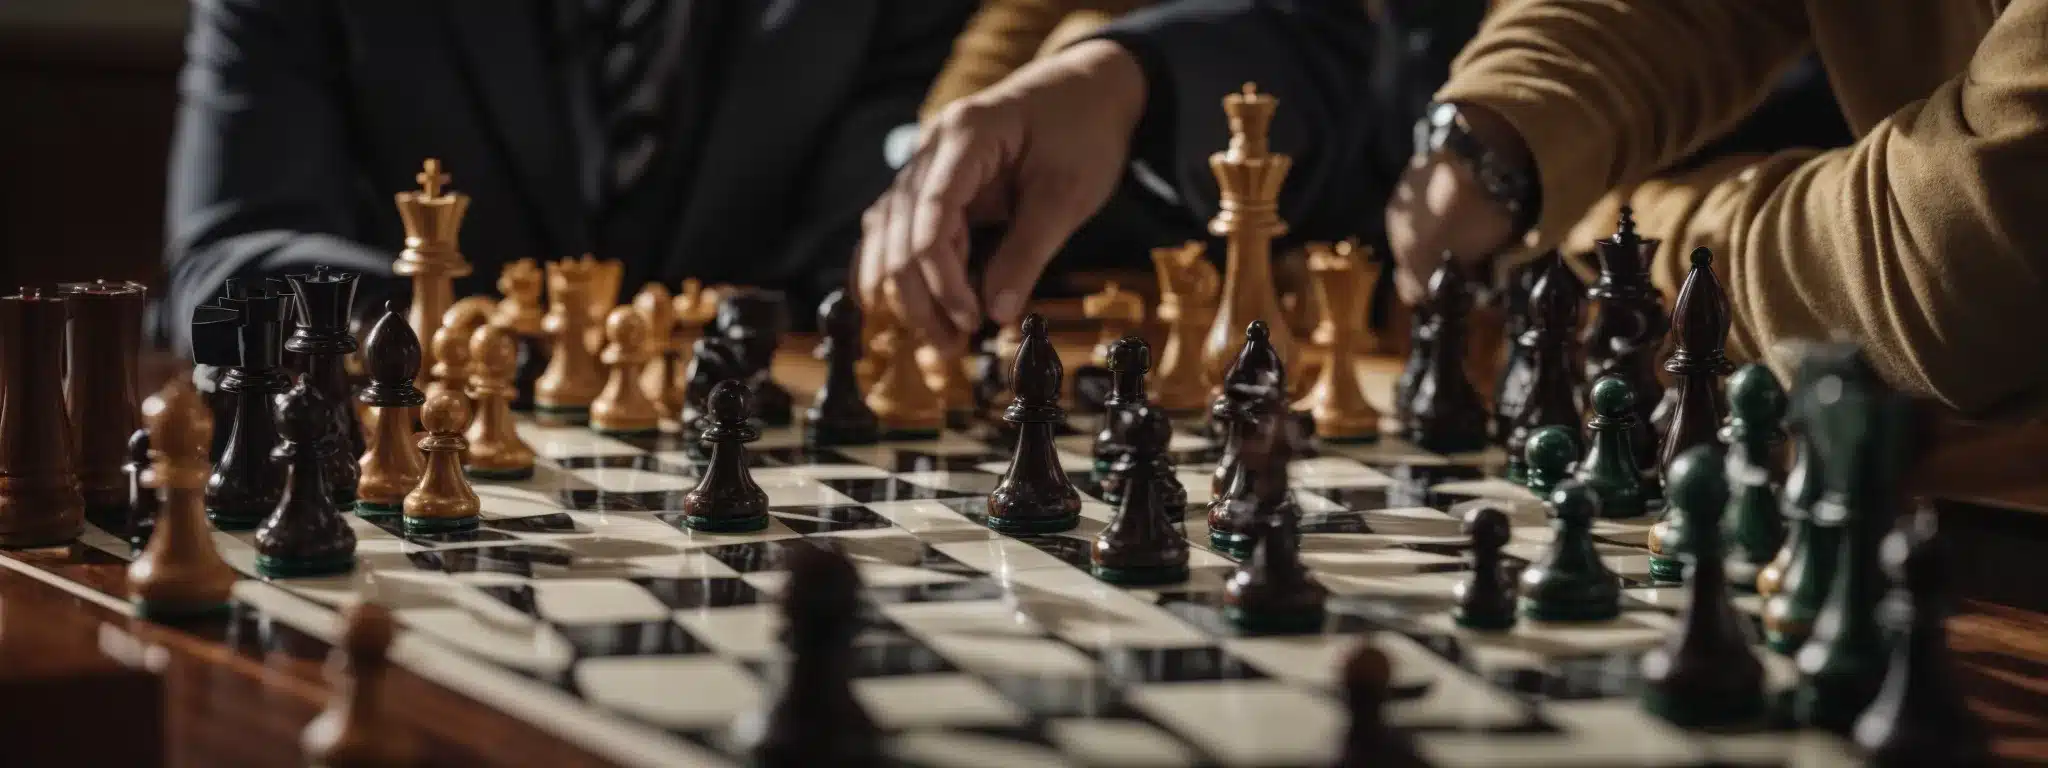  A Business Strategist Intently Observes A Chessboard Where Each Piece Represents Different Market Players.